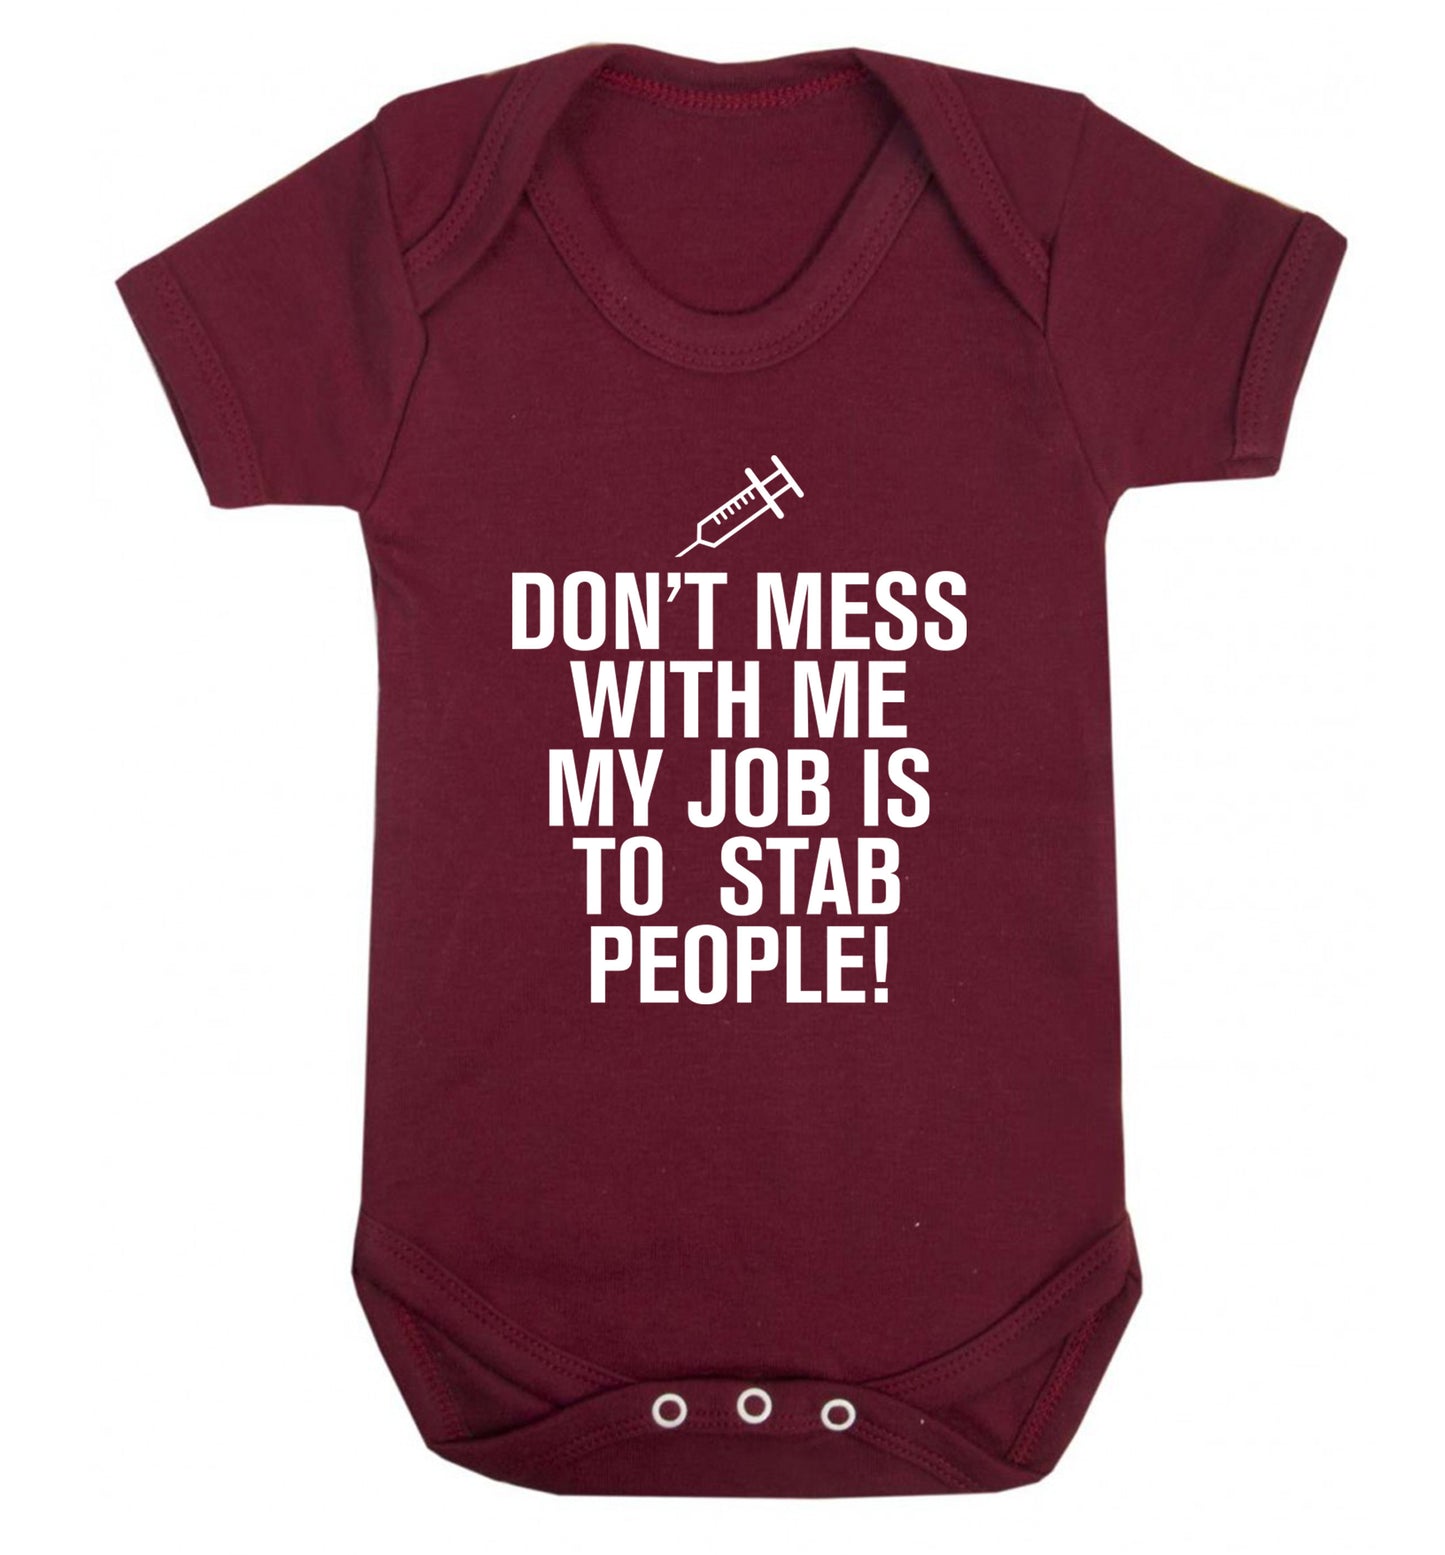 Don't mess with me my job is to stab people! Baby Vest maroon 18-24 months